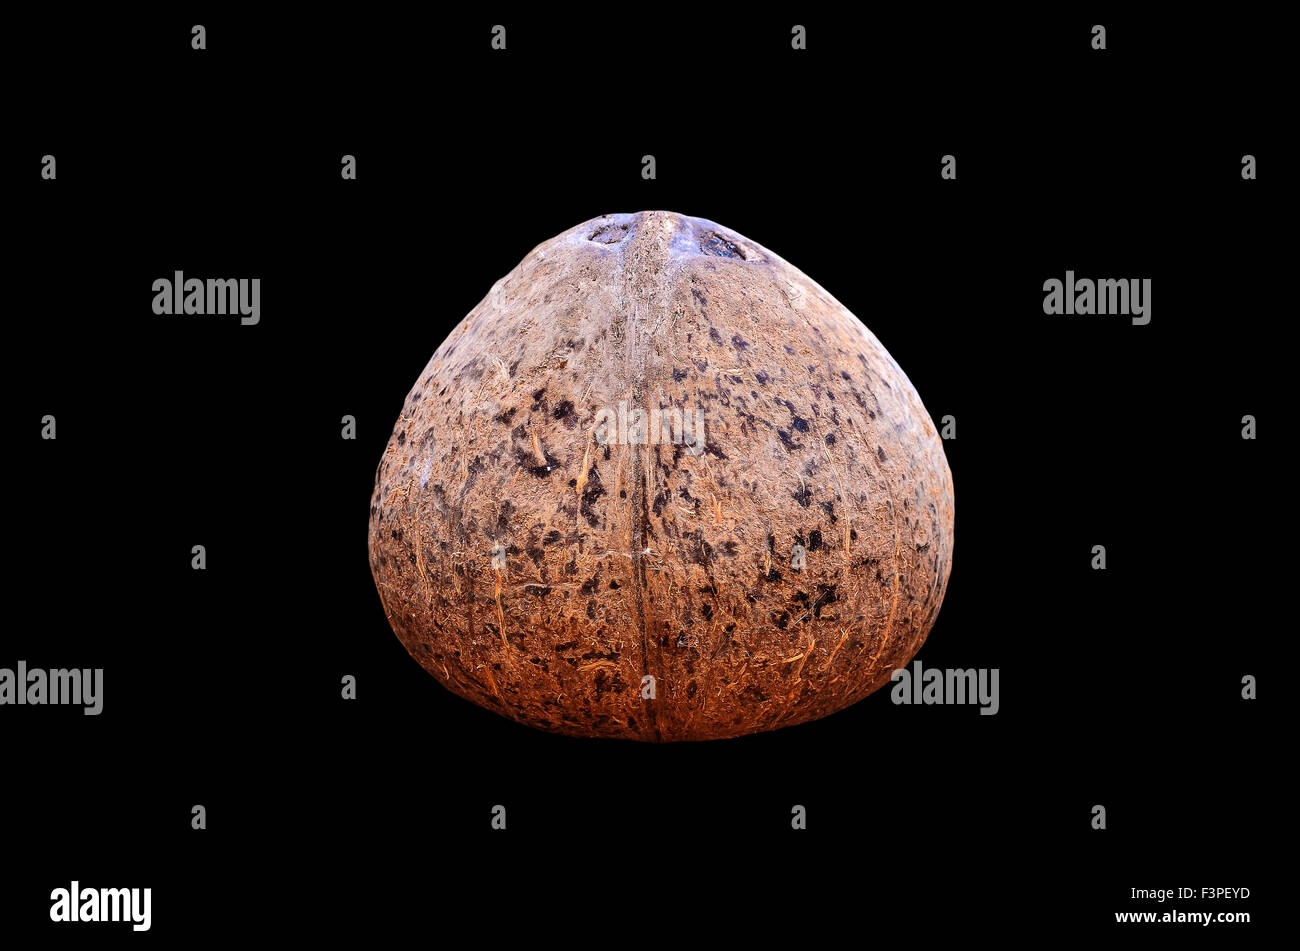 Coconut shell on black background Stock Photo